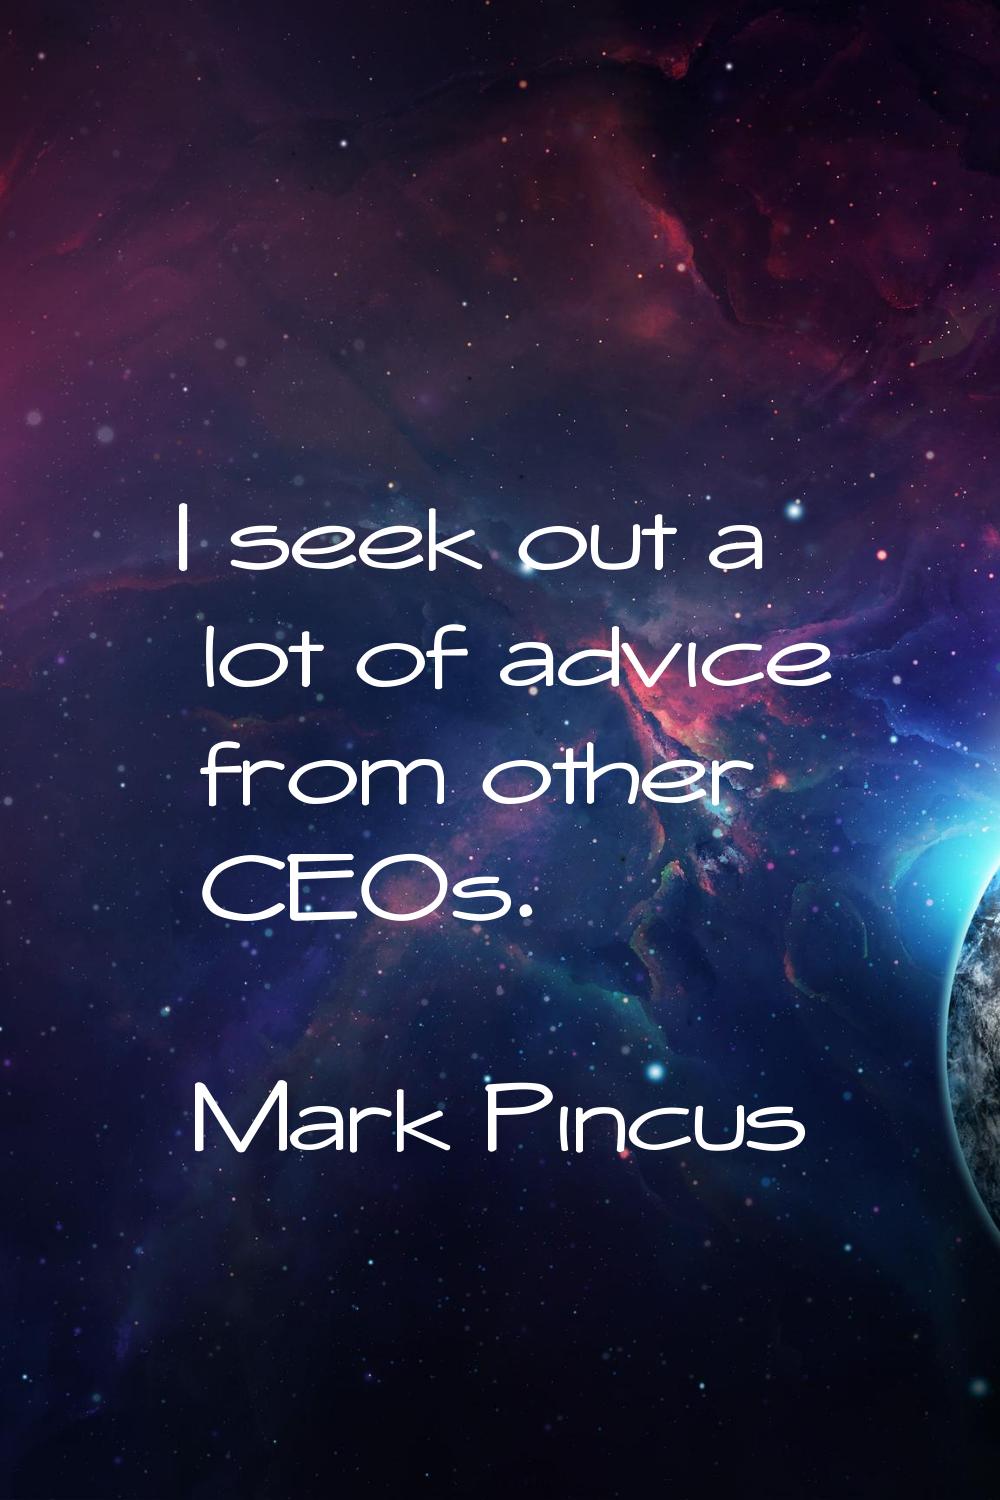 I seek out a lot of advice from other CEOs.